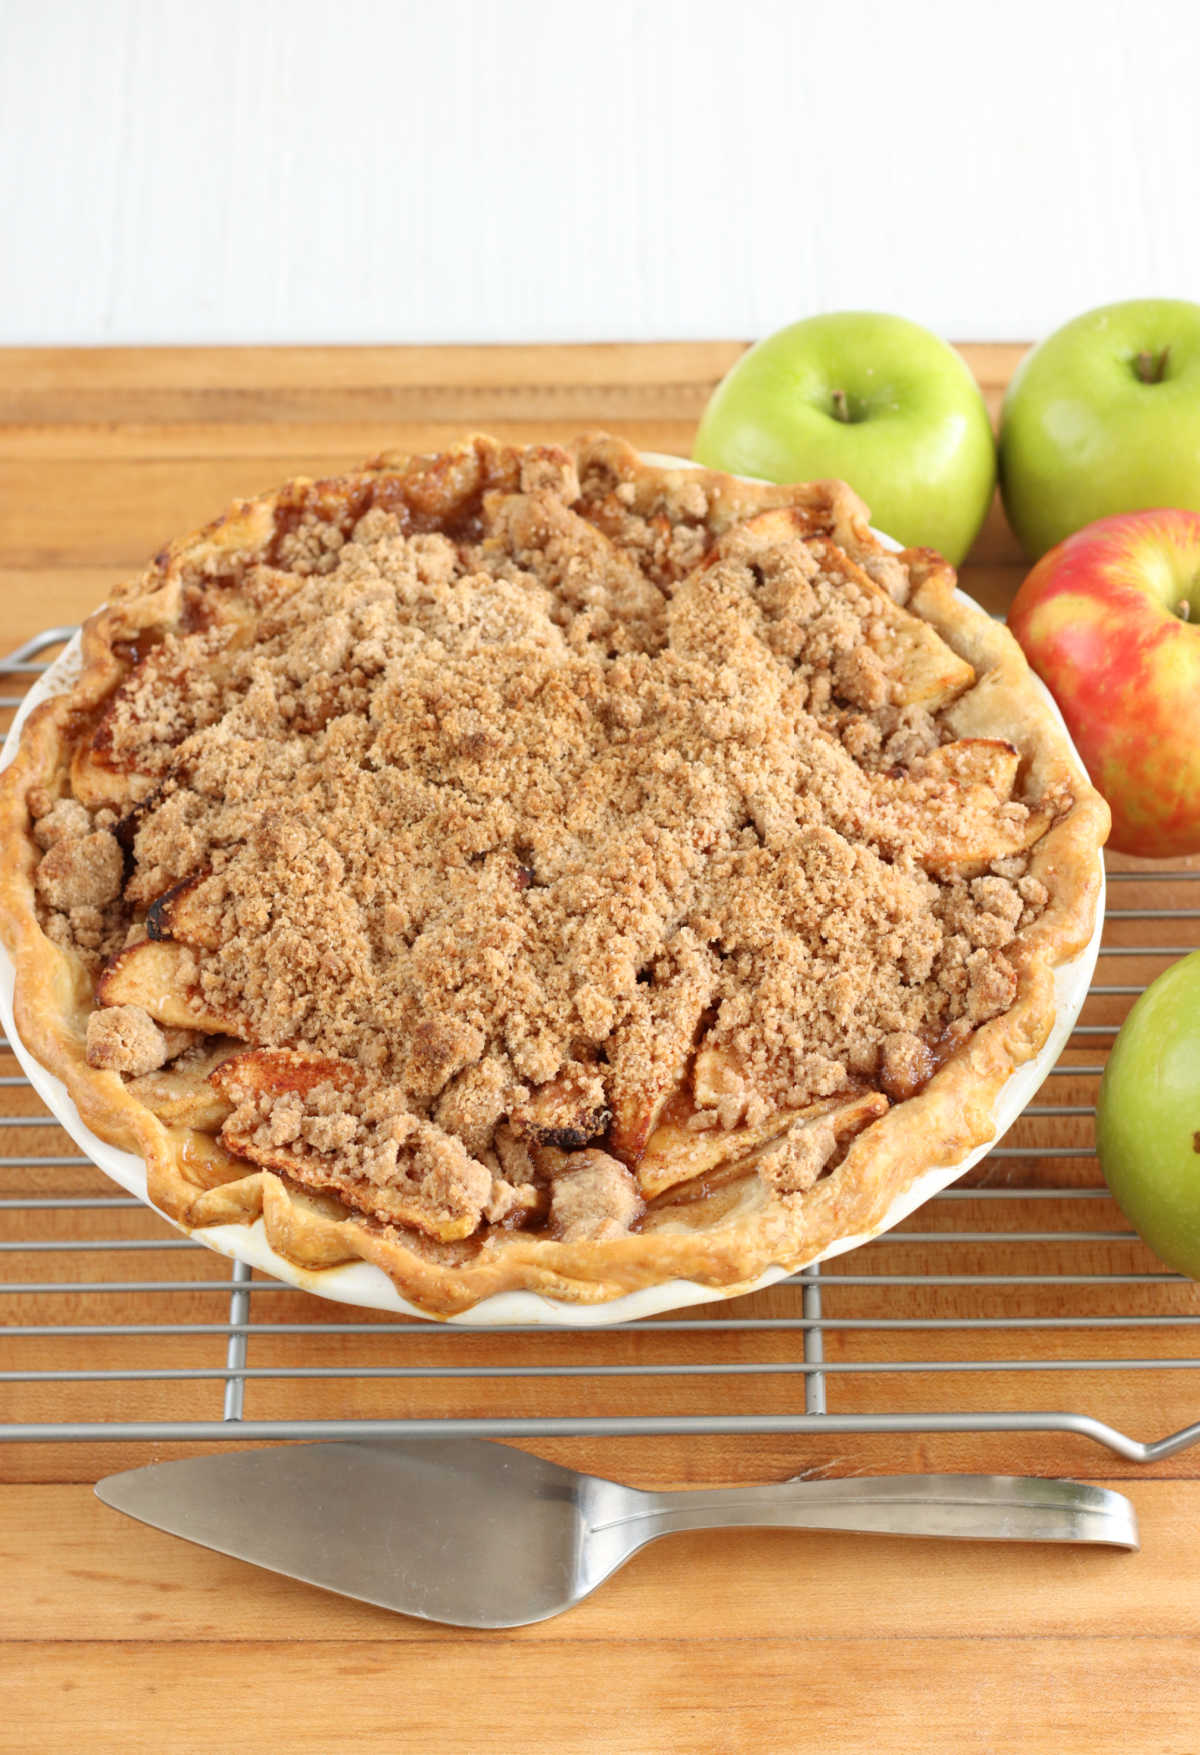 Apple pie with crumb topping on metal cooling rack on butcher block, pie cutter in front.